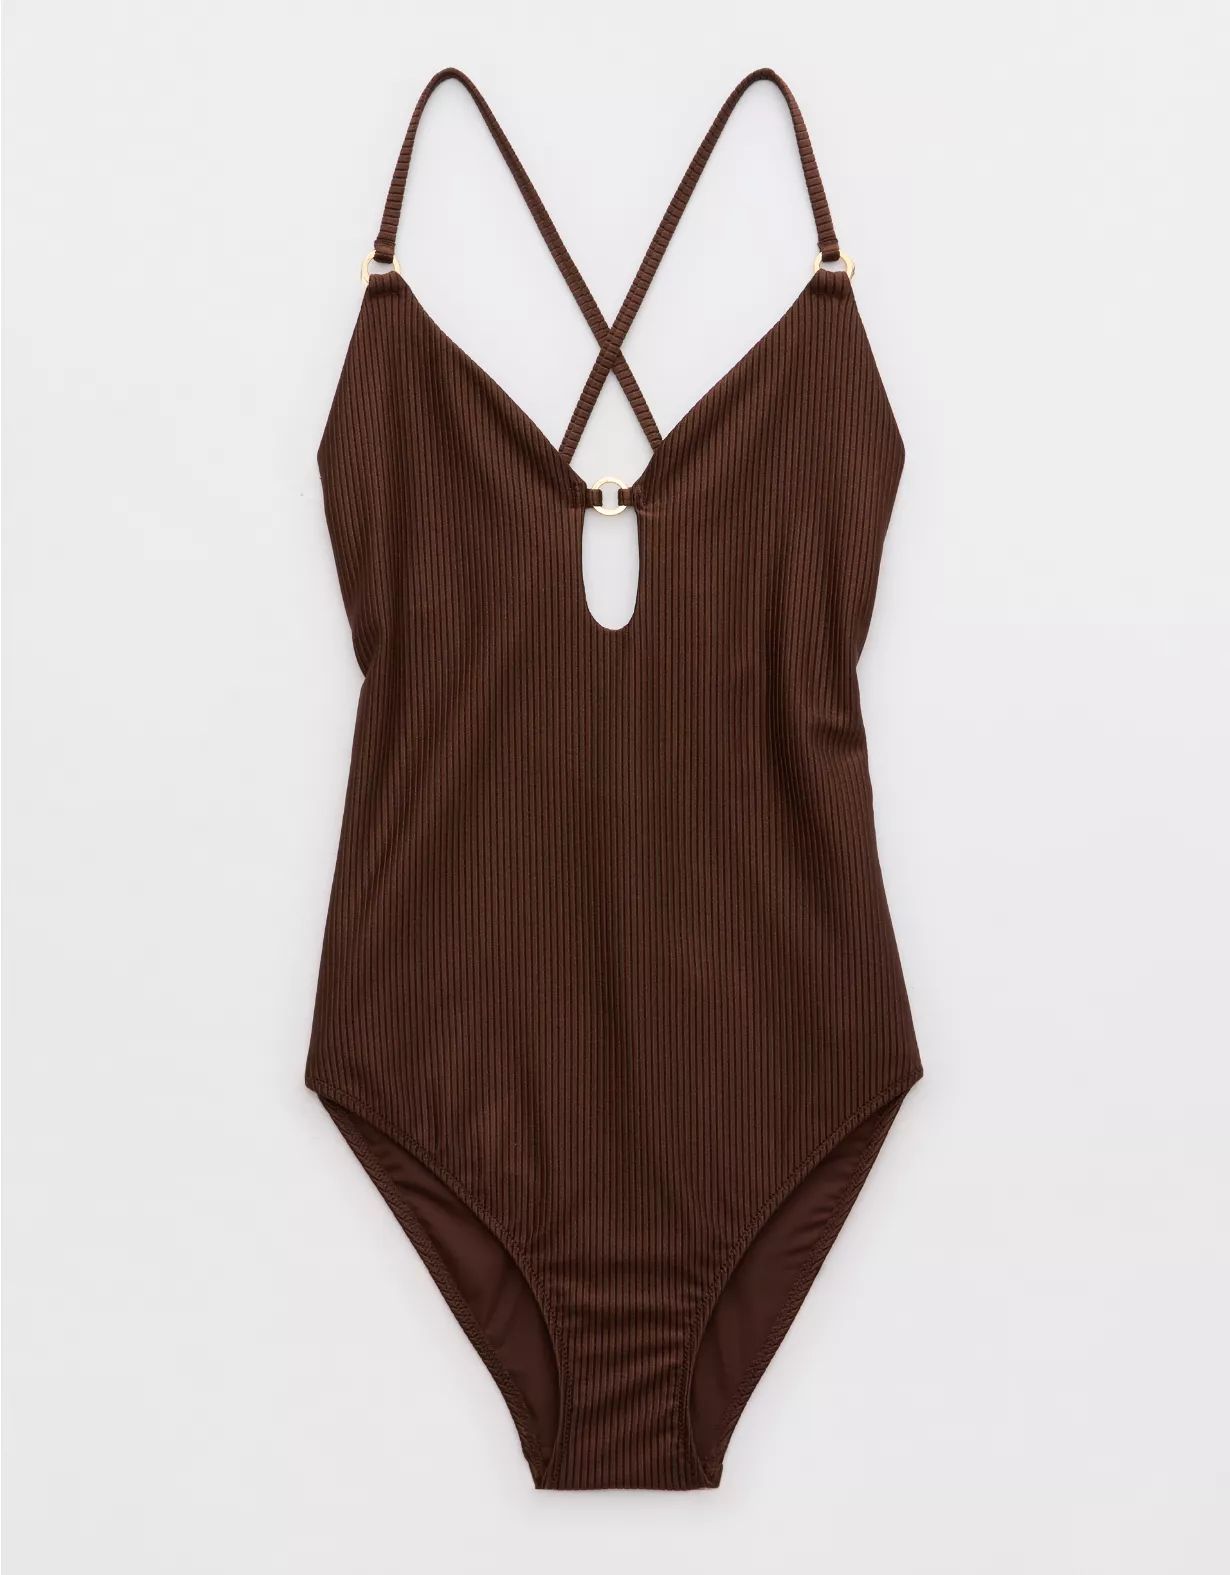 Aerie Shine Rib Full Coverage One Piece Swimsuit | Aerie